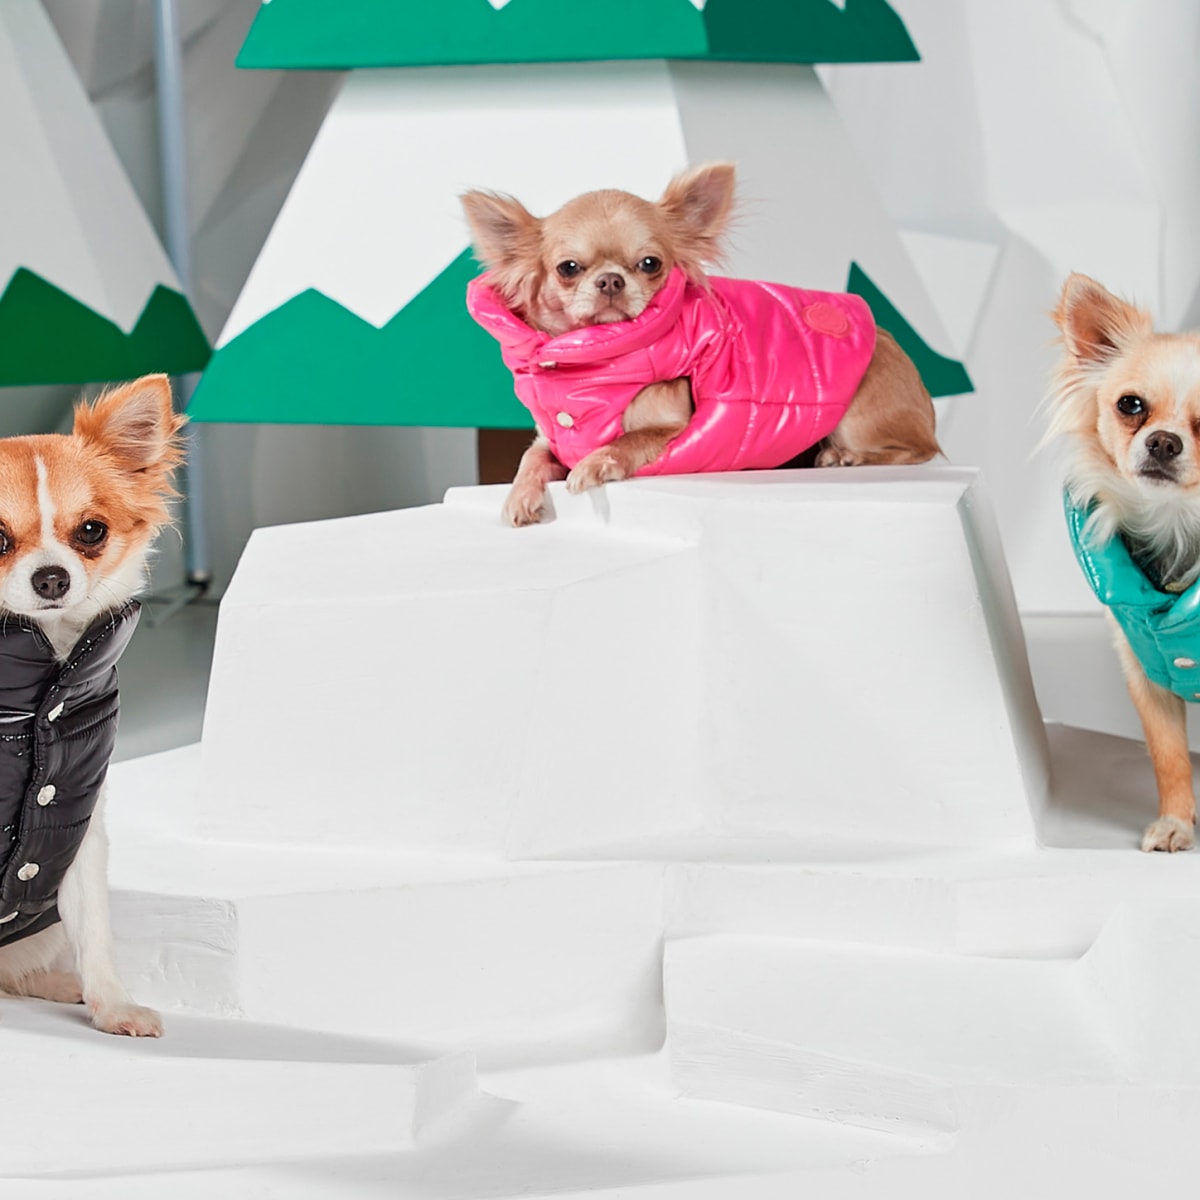 10 High End Fashion Brands You May Not Know Also Design For Pups